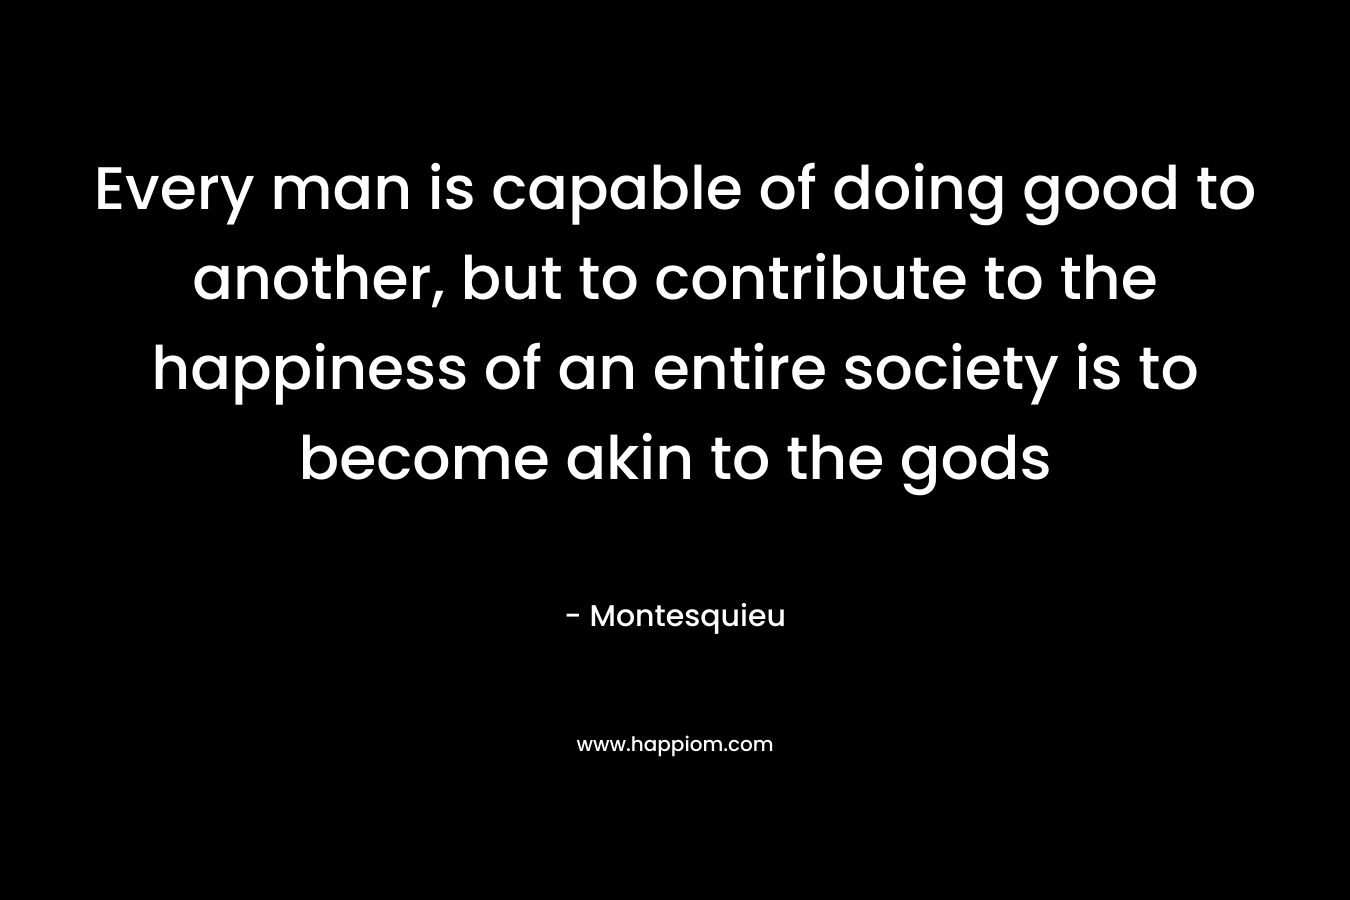 Every man is capable of doing good to another, but to contribute to the happiness of an entire society is to become akin to the gods